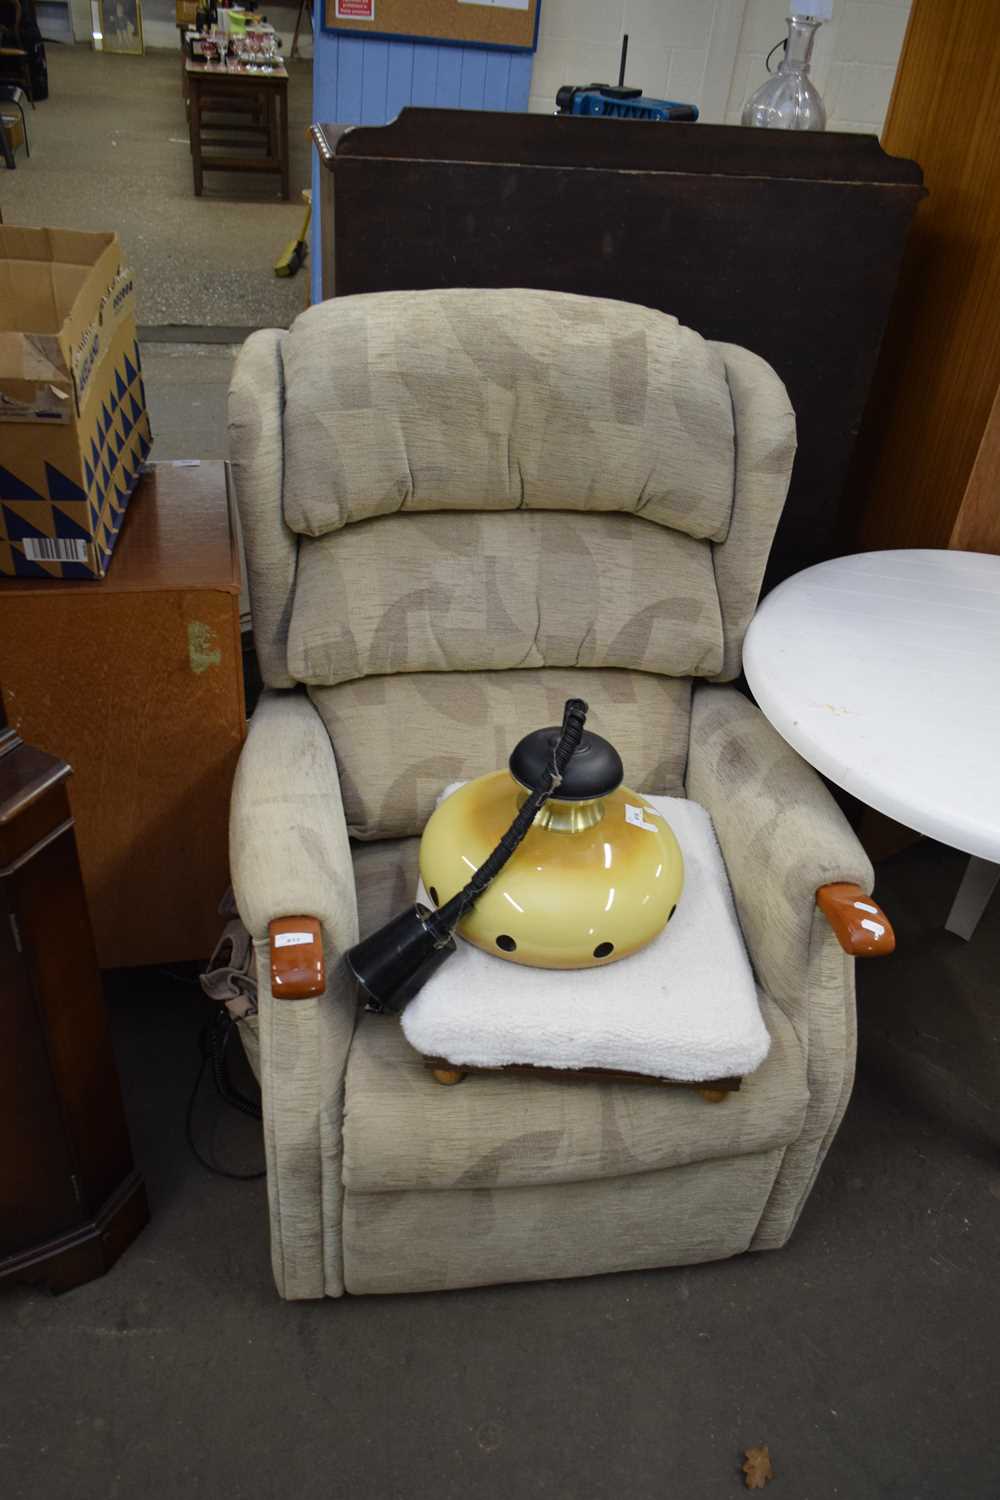 ELECTRIC RECLINER CHAIR